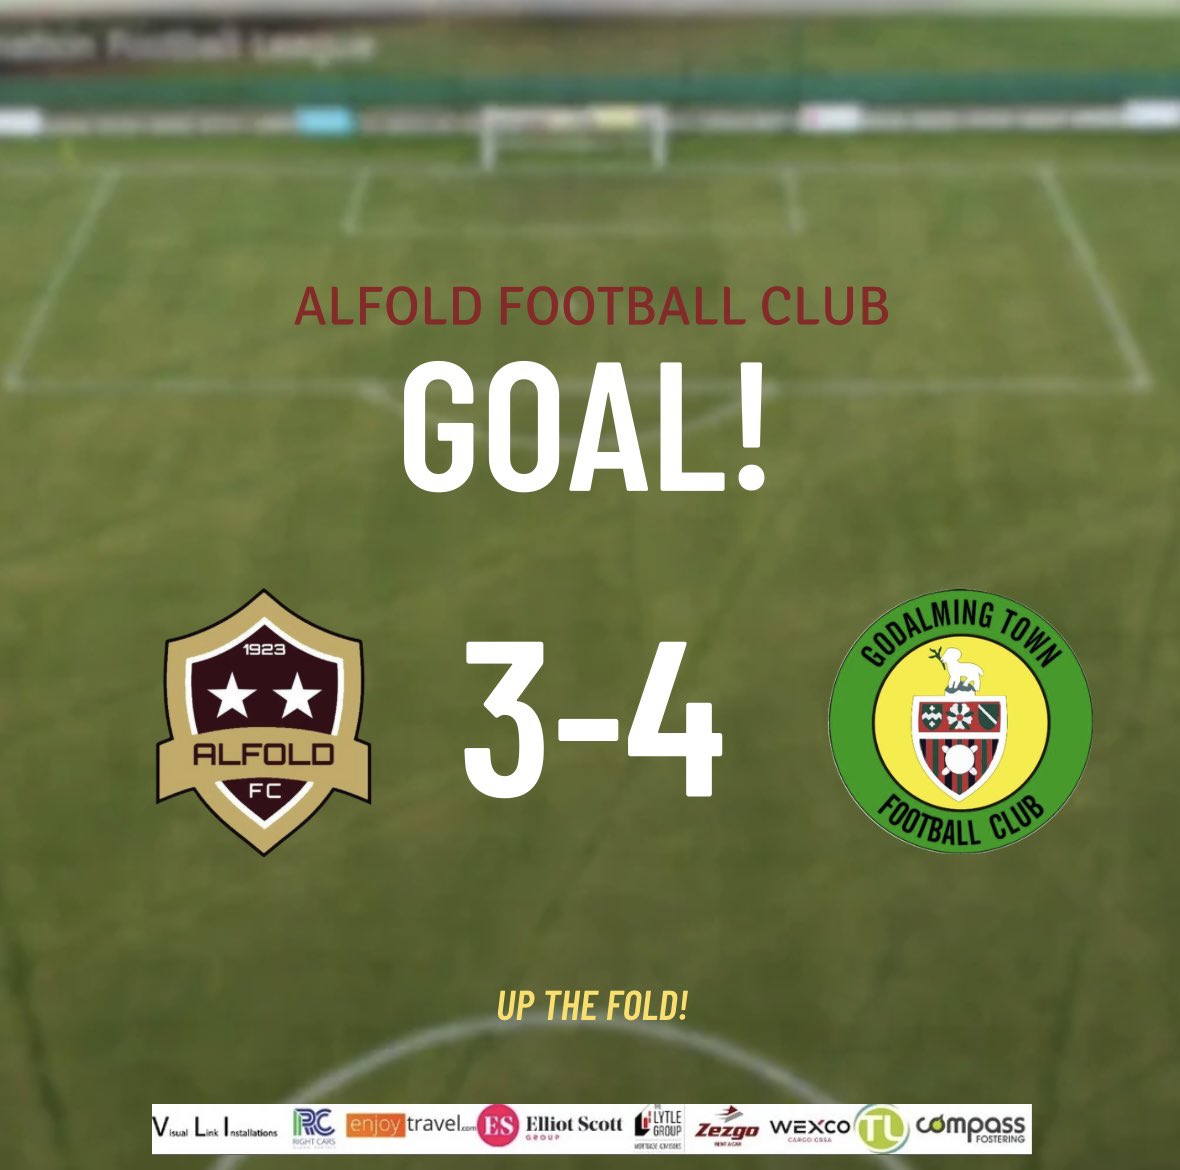 ⚽️Goal⚽️ We’ve made it 3-4 with a goal from Finn Bishop #UTF